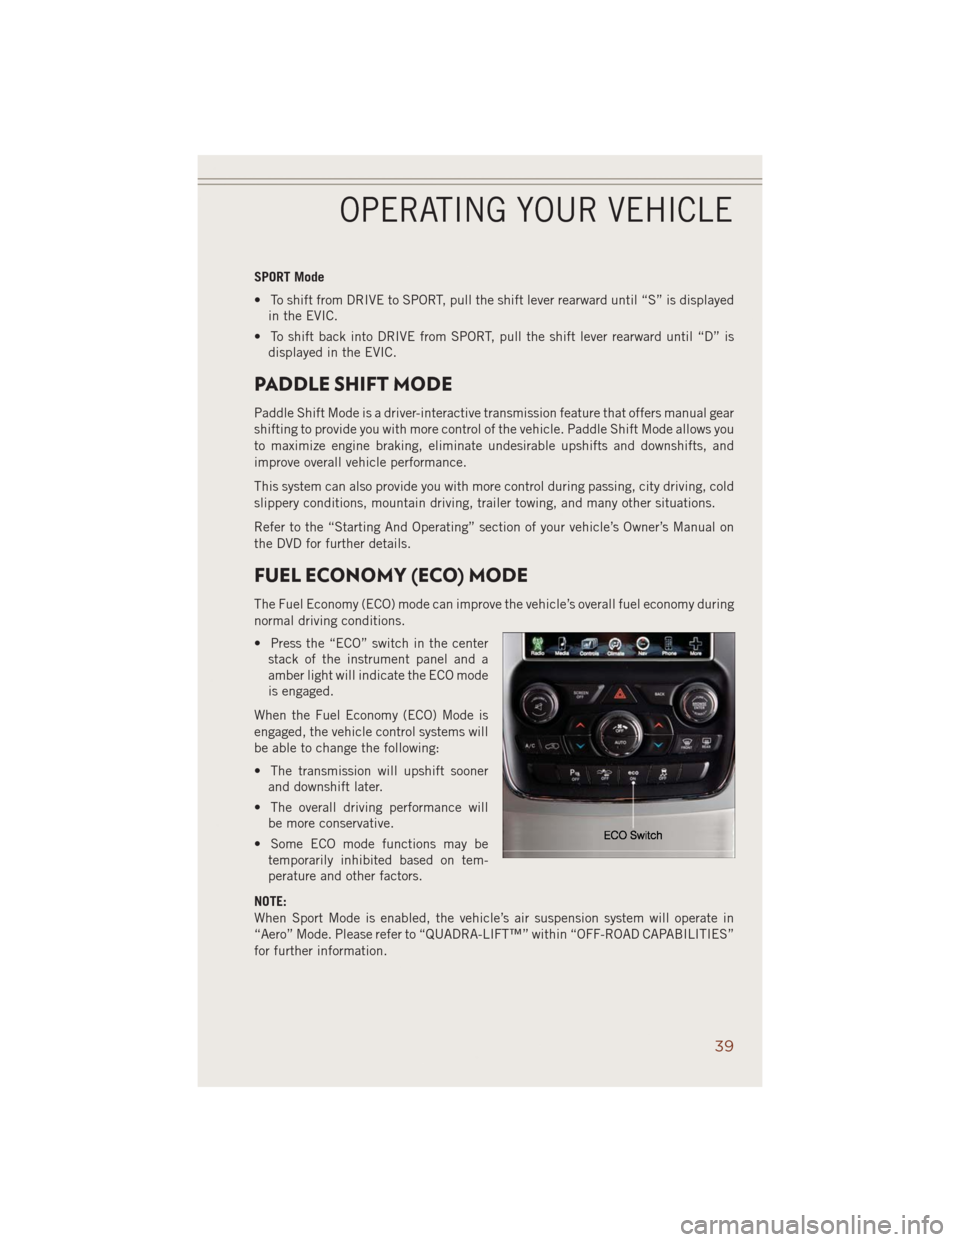 JEEP GRAND CHEROKEE 2014 WK2 / 4.G User Guide SPORT Mode
• To shift from DRIVE to SPORT, pull the shift lever rearward until “S” is displayed
in the EVIC.
• To shift back into DRIVE from SPORT, pull the shift lever rearward until “D” 